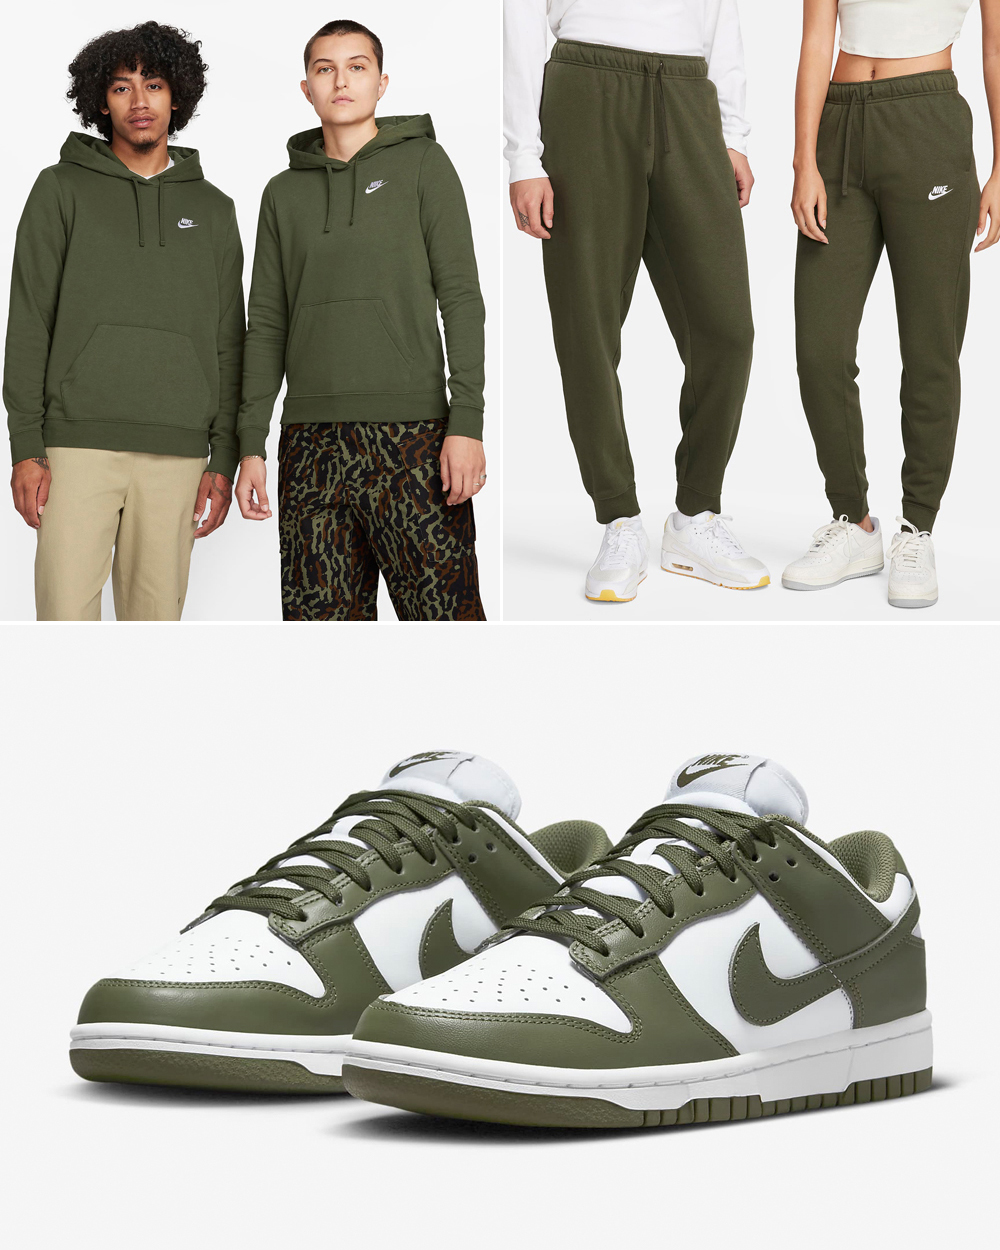 Nike-Dunk-Low-Medium-Olive-Outfits-1